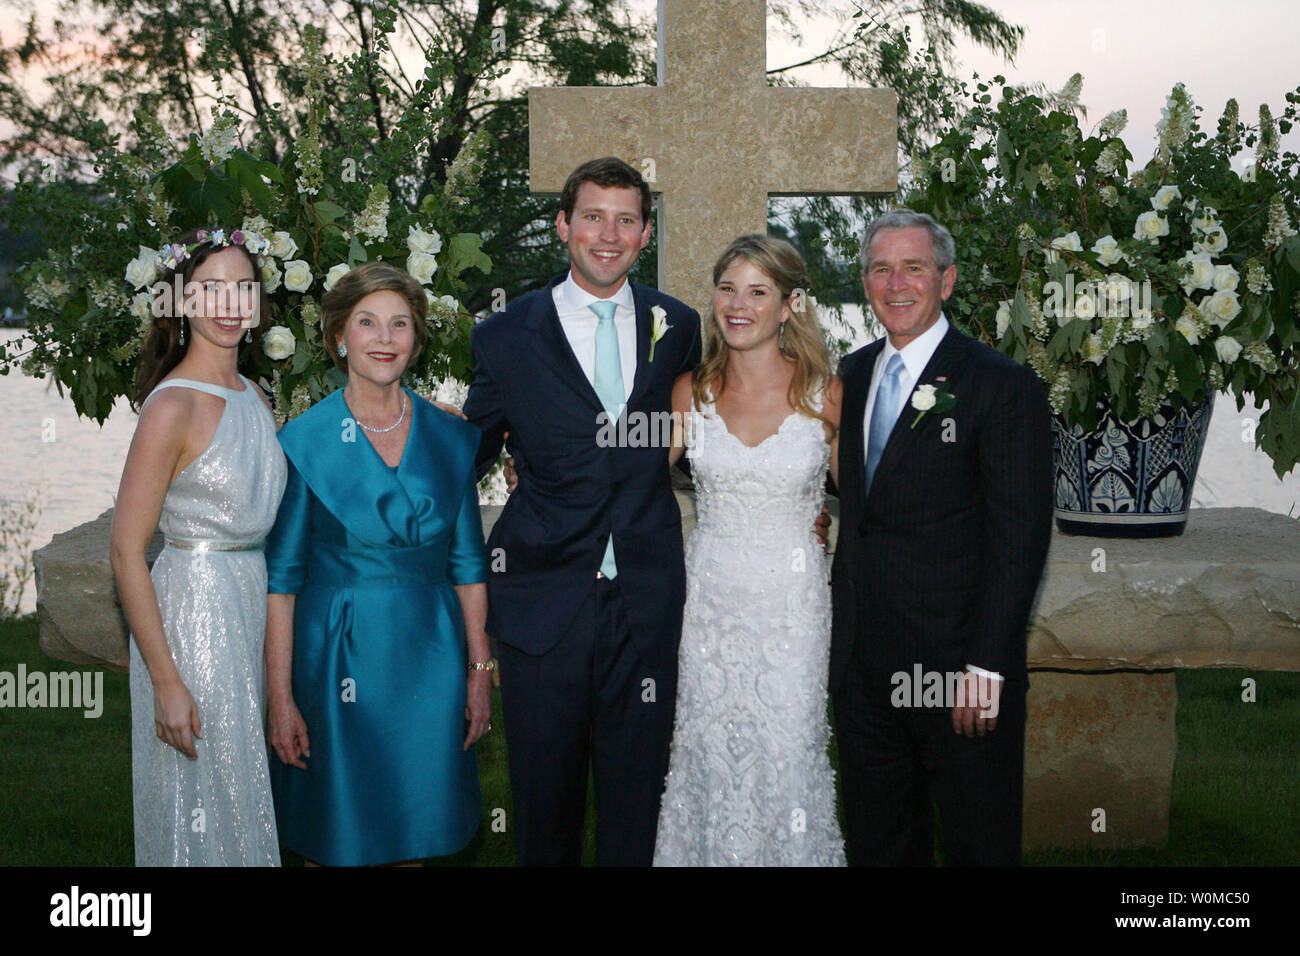 President George W. Bush and Mrs. Laura Bush and Barbara Bush stand with the new Mr. and Mrs. Henry Hager following the young couple's wedding ceremony at Prairie Chapel Ranch Saturday, May 10, 2008, near Crawford, Texas.  Jenna Bush, daughter of President George W. Bush, was married to Henry Hager.   Photo released by White House on May 11th.   (UPI Photo/White House/Shealah Craighead) Stock Photo